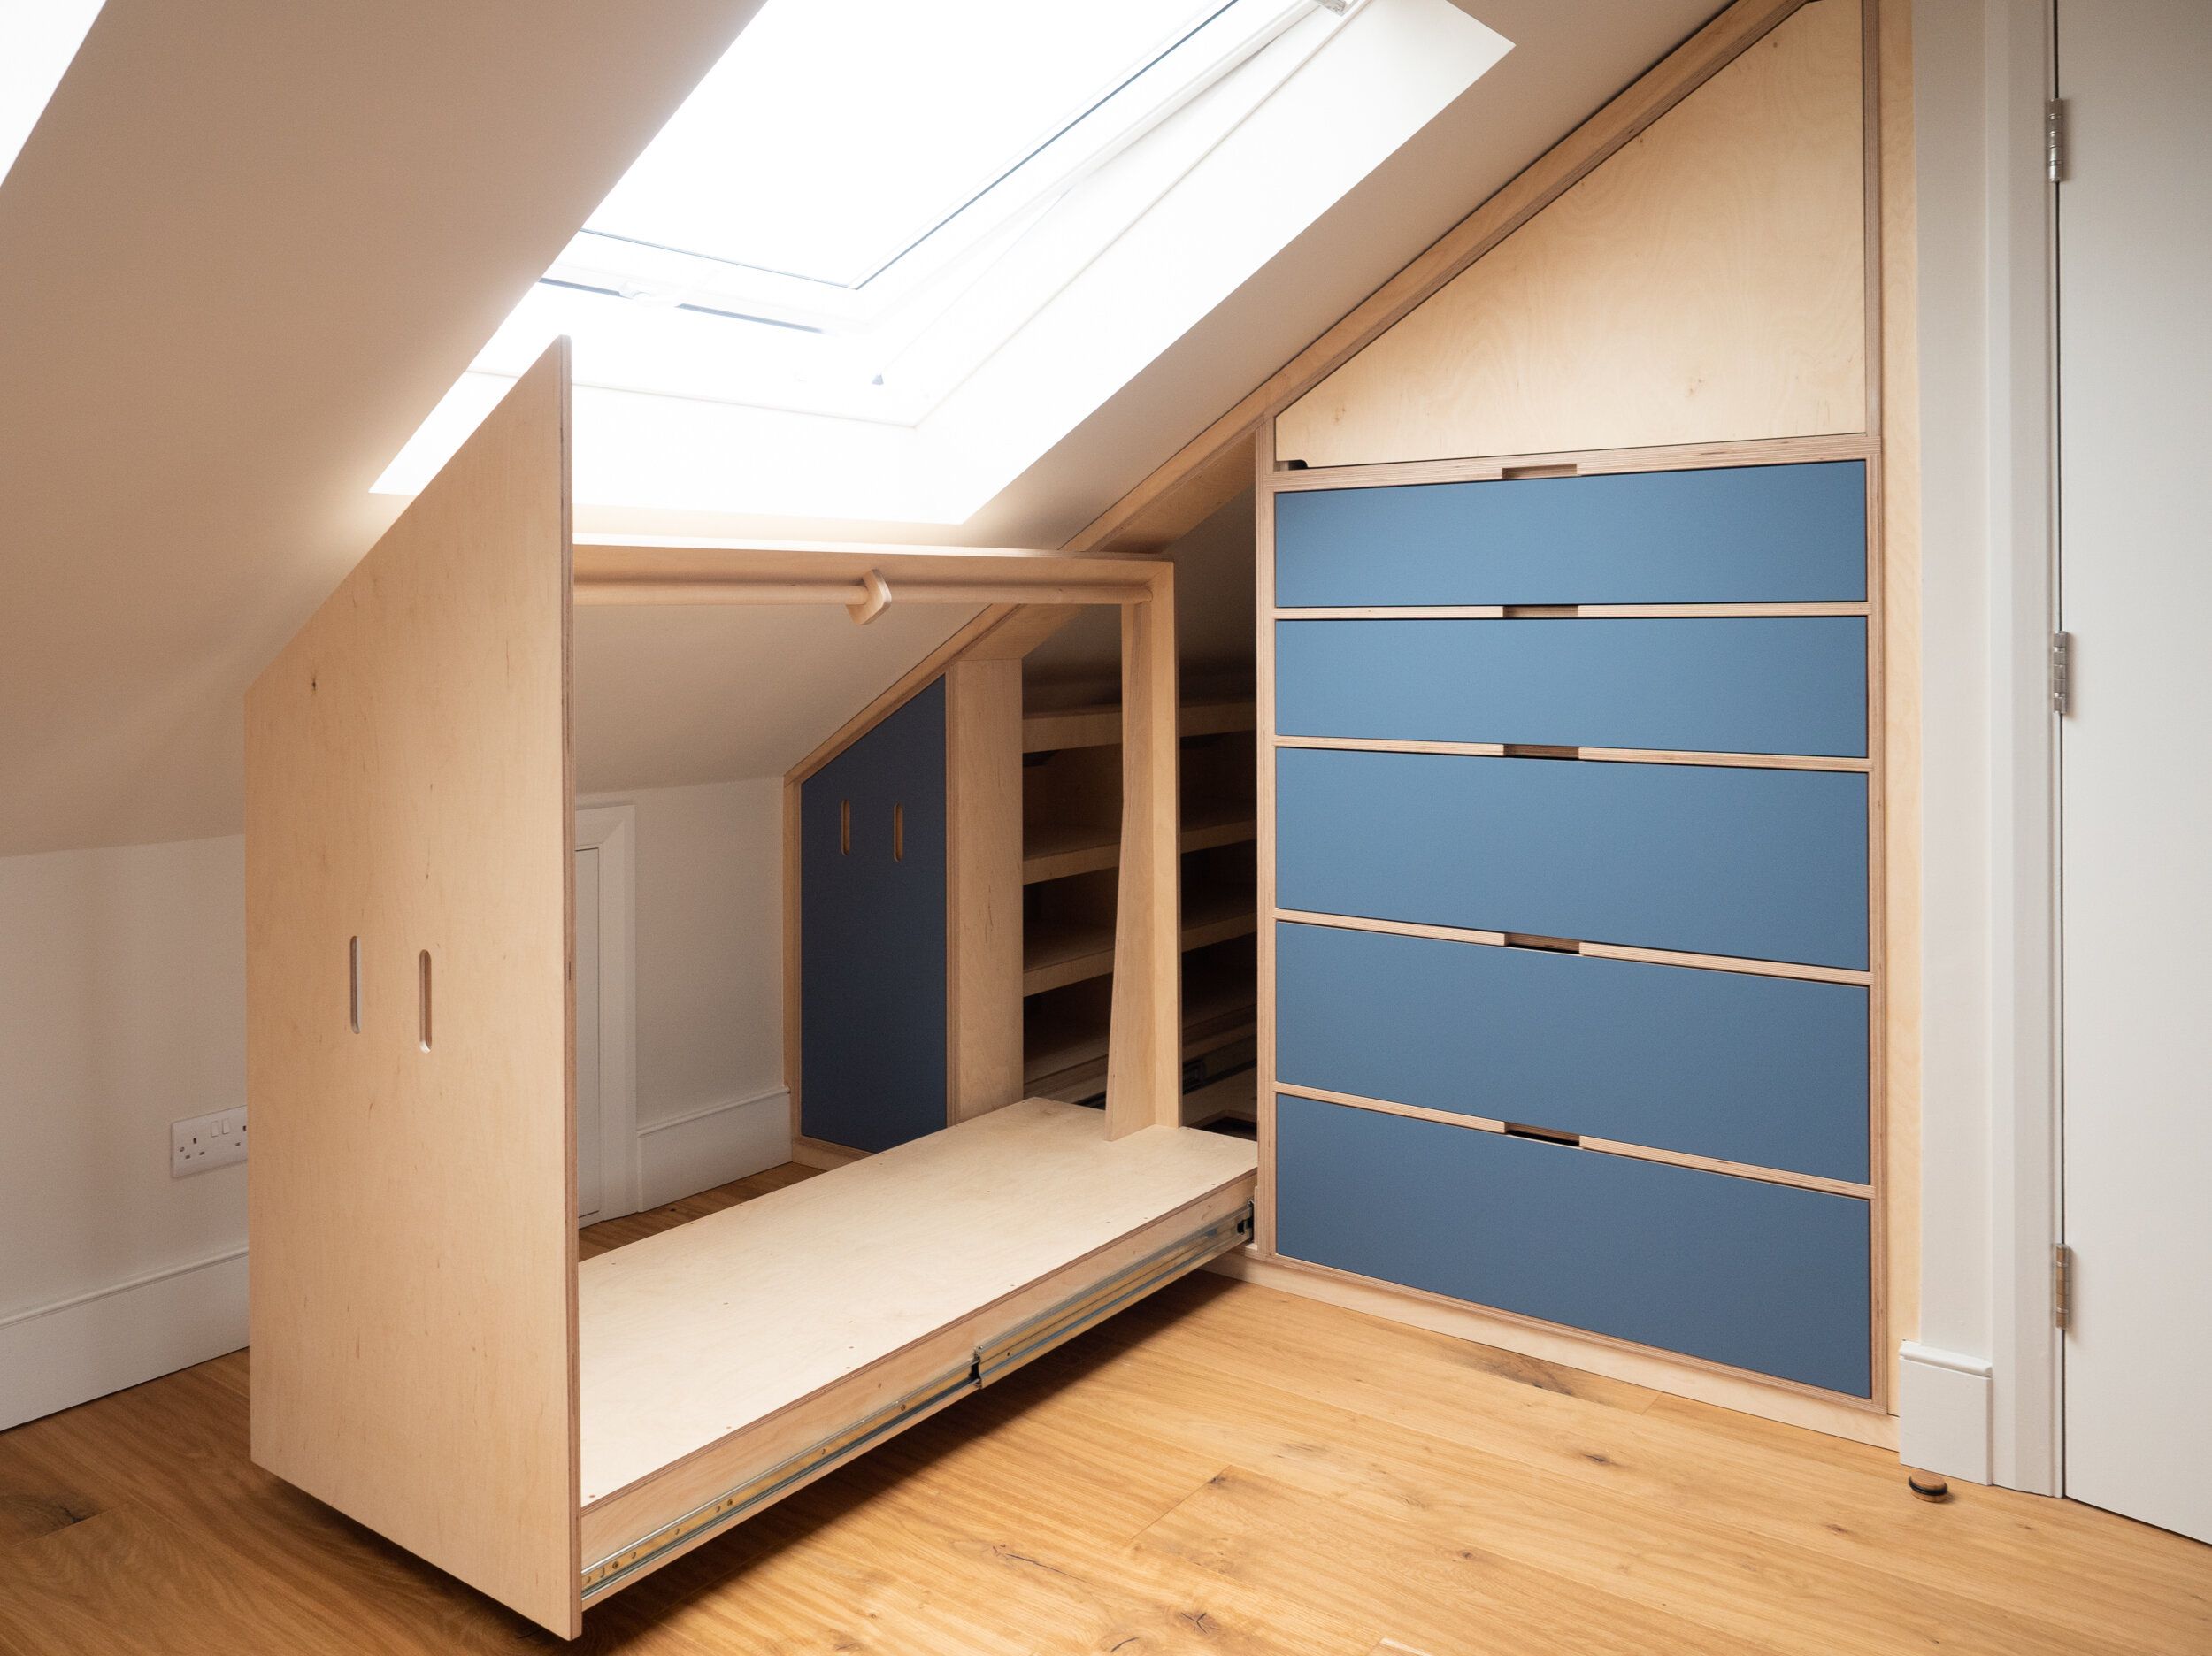 Plywood Eaves Wardrobe (with The Giant Drawers Of Dreams And Fenix Laminate  Fronts) — The Modern Carpenter In Heavy Duty Wardrobes (View 11 of 15)